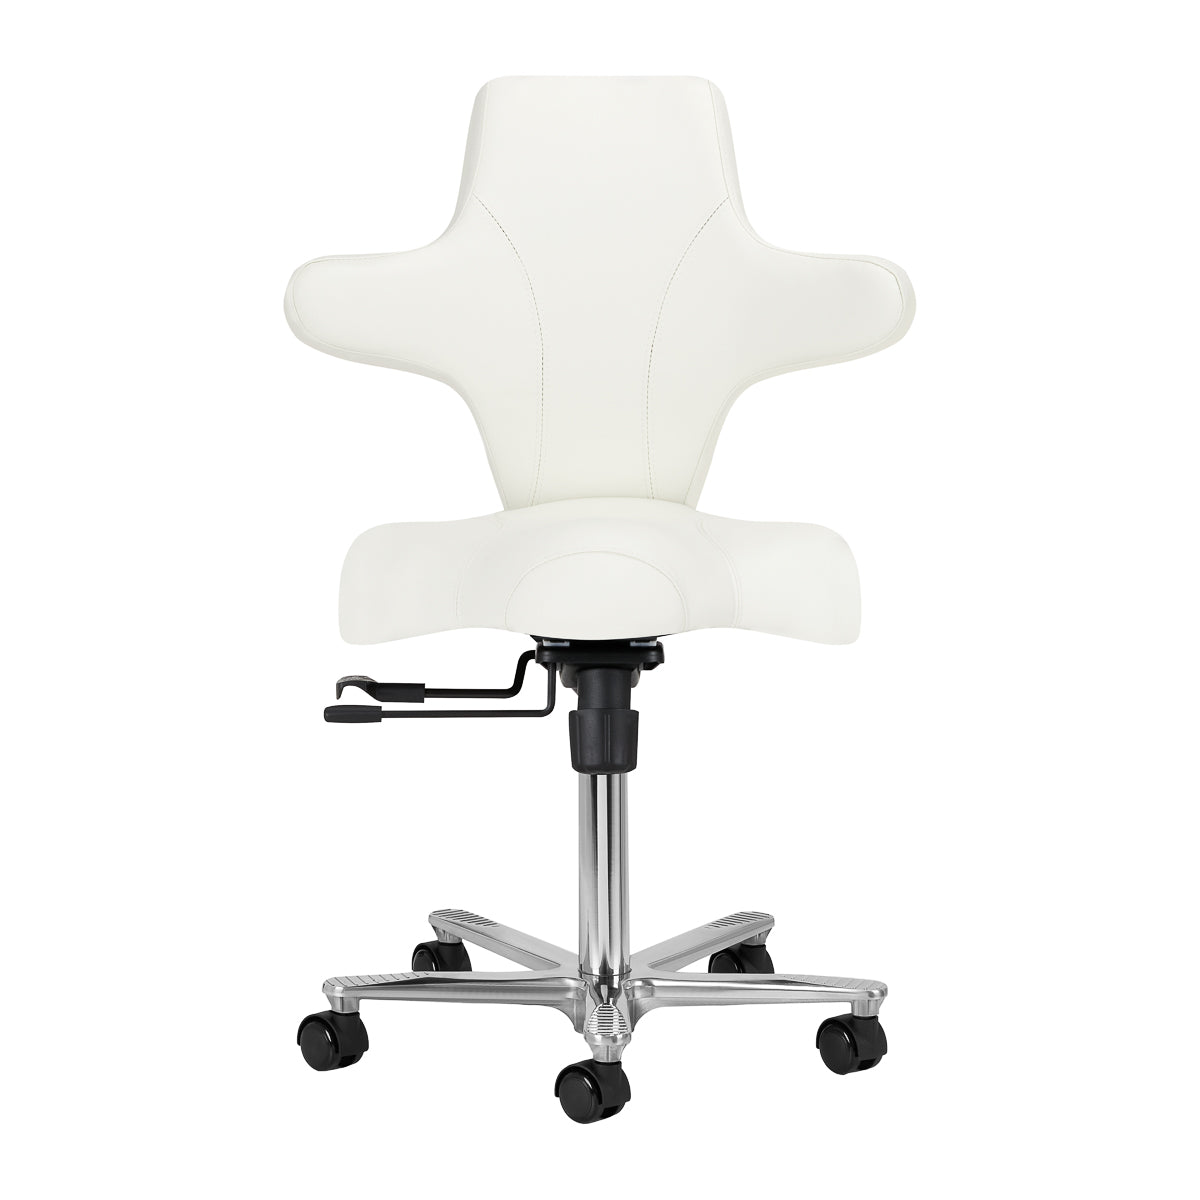 Azzurro Special 152 cosmetic chair white 